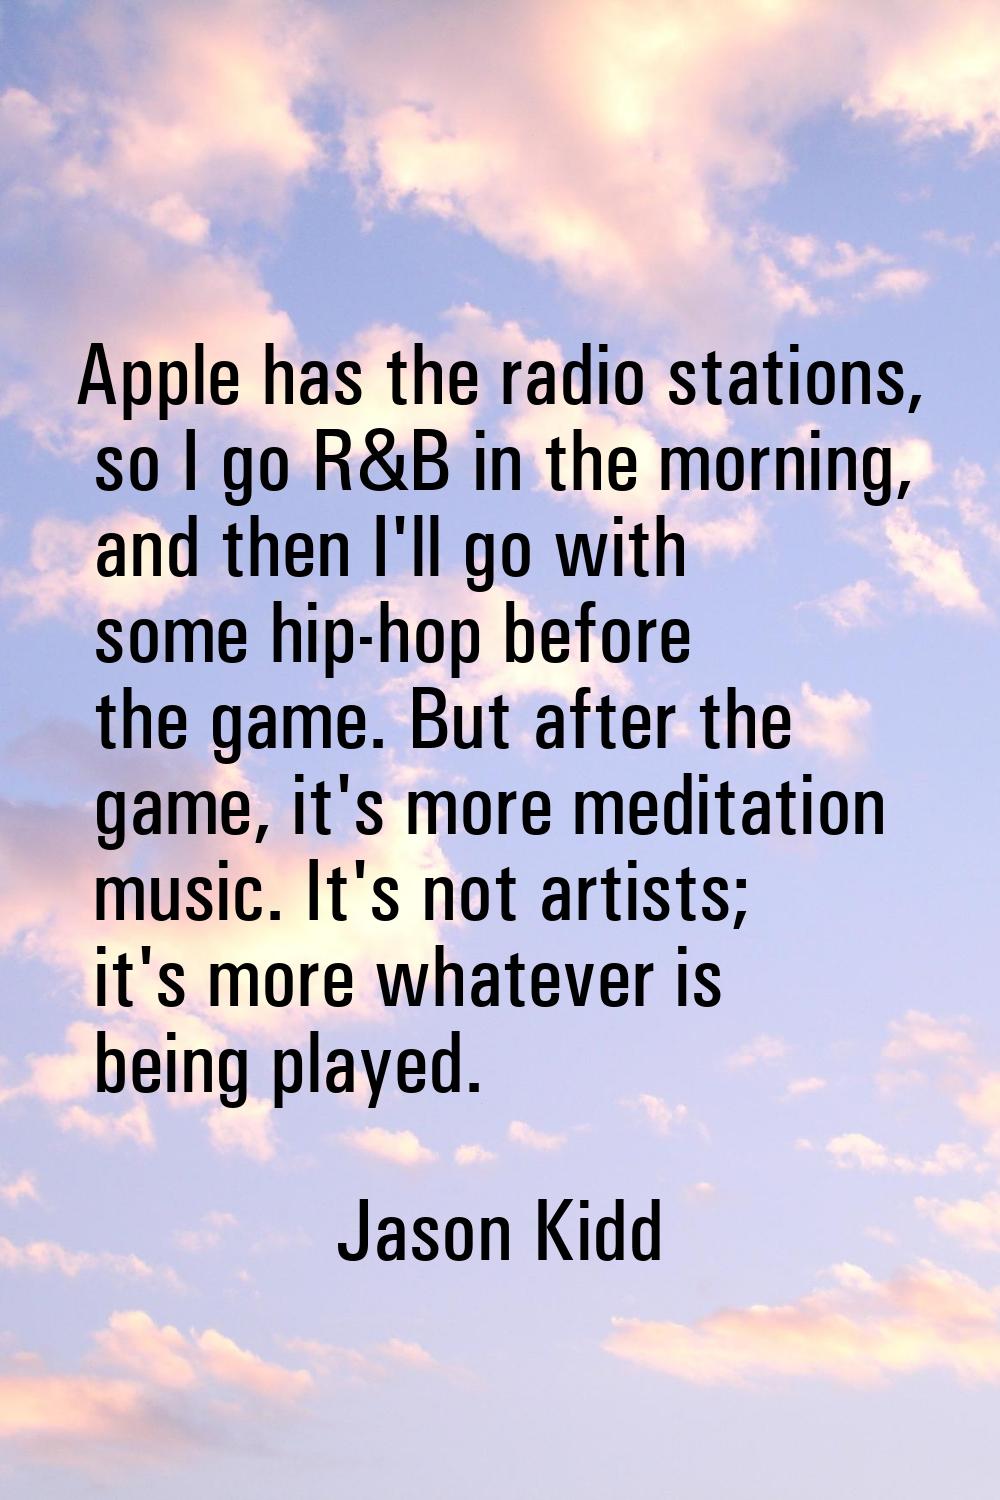 Apple has the radio stations, so I go R&B in the morning, and then I'll go with some hip-hop before